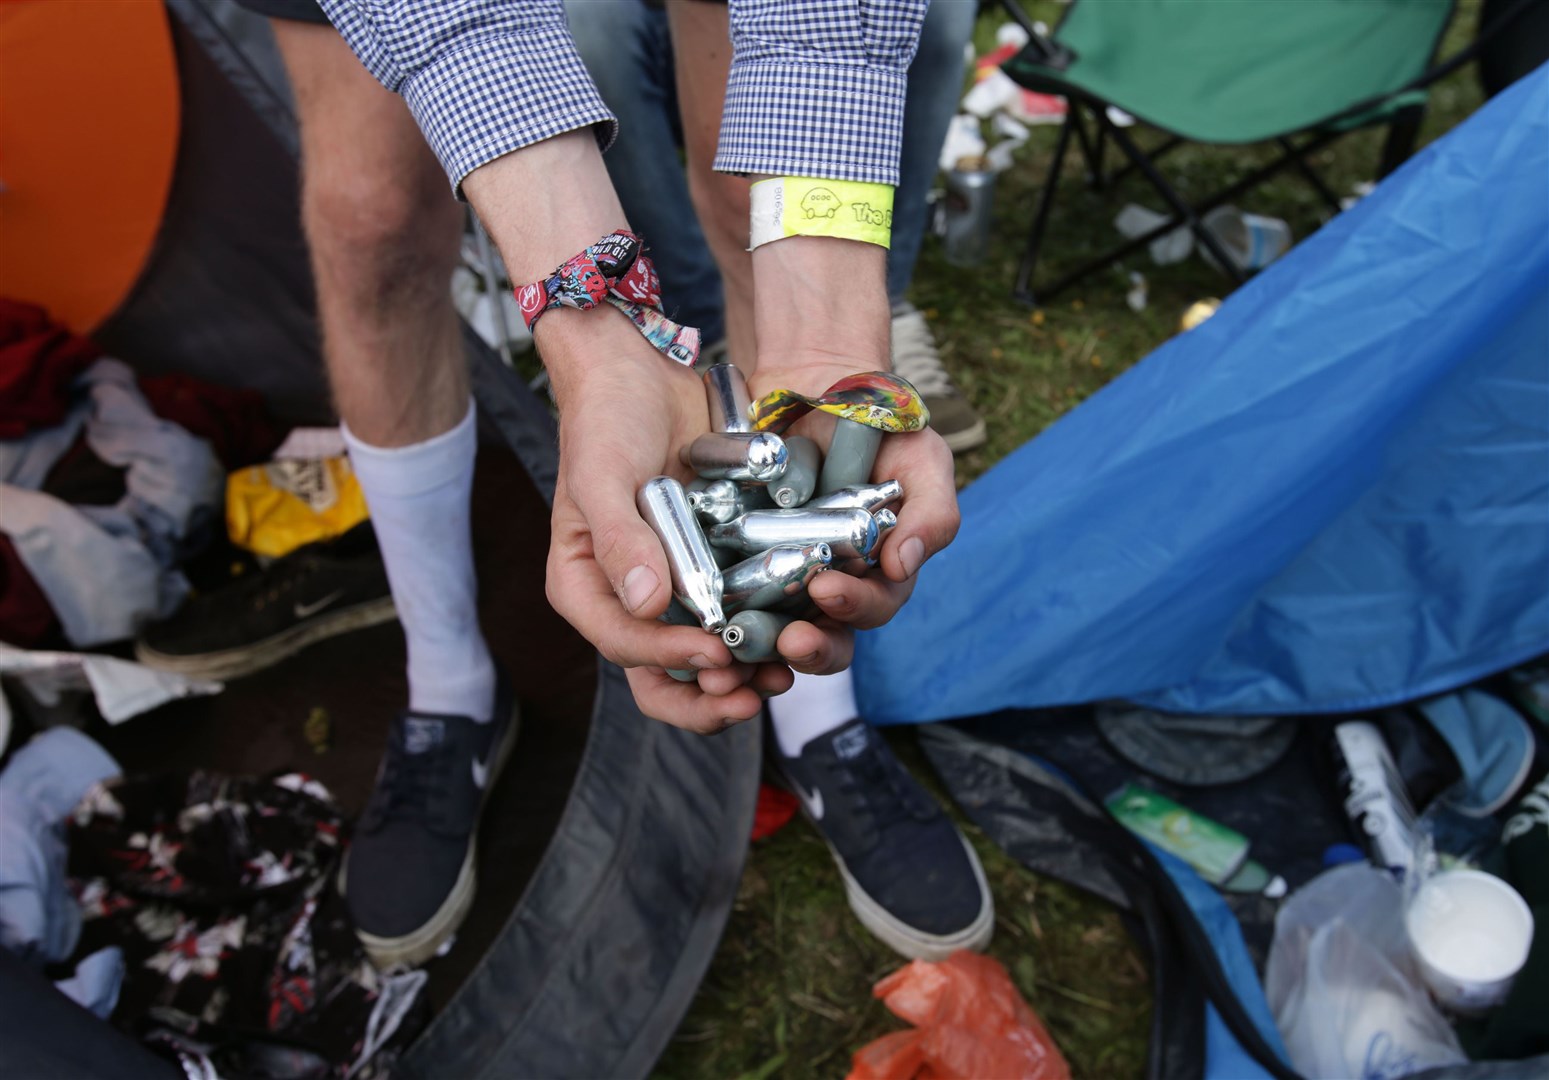 A festivalgoer holding a handful of spent laughing gas canisters in a campsite at Reading Festival in 2014 (PA)